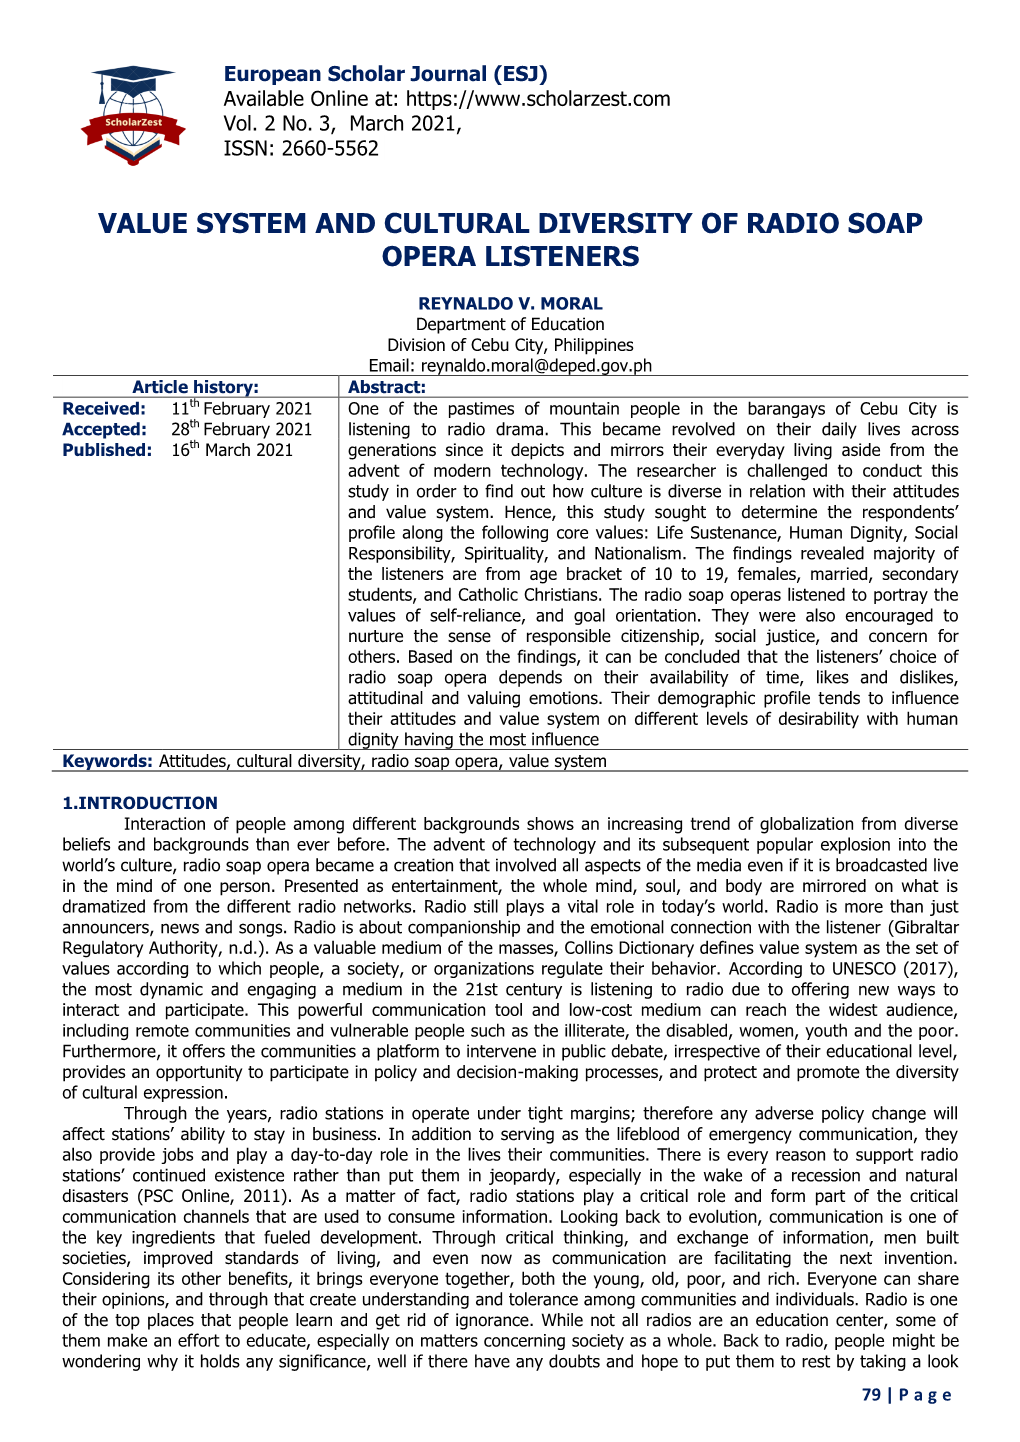 Value System and Cultural Diversity of Radio Soap Opera Listeners